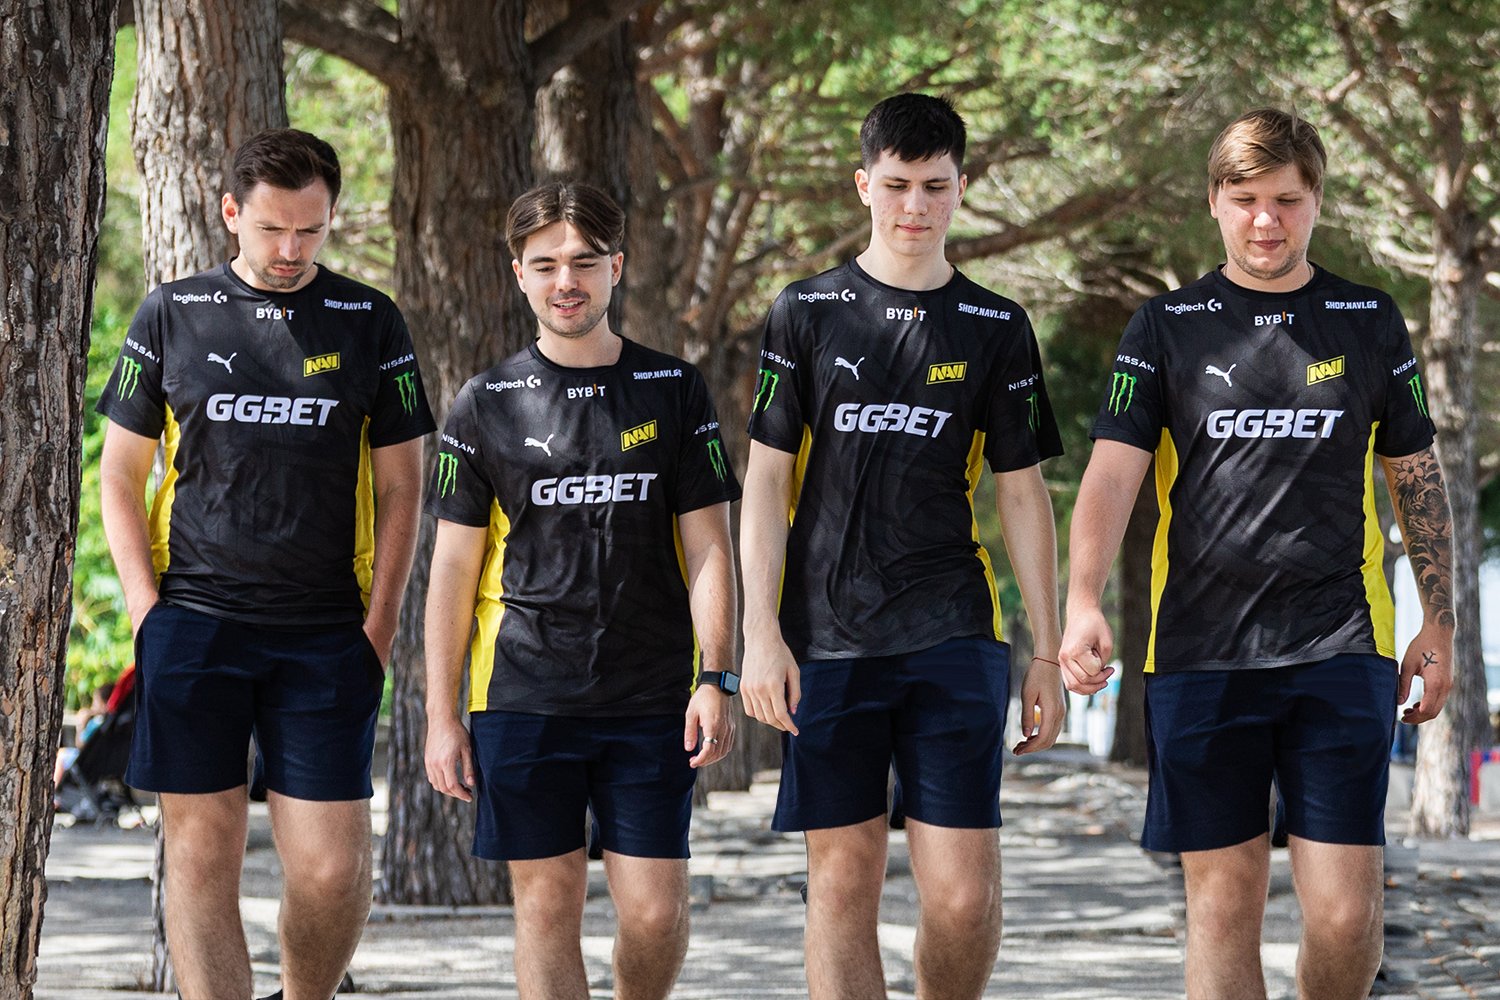 B1ad3, sdy, B1t and S1mple